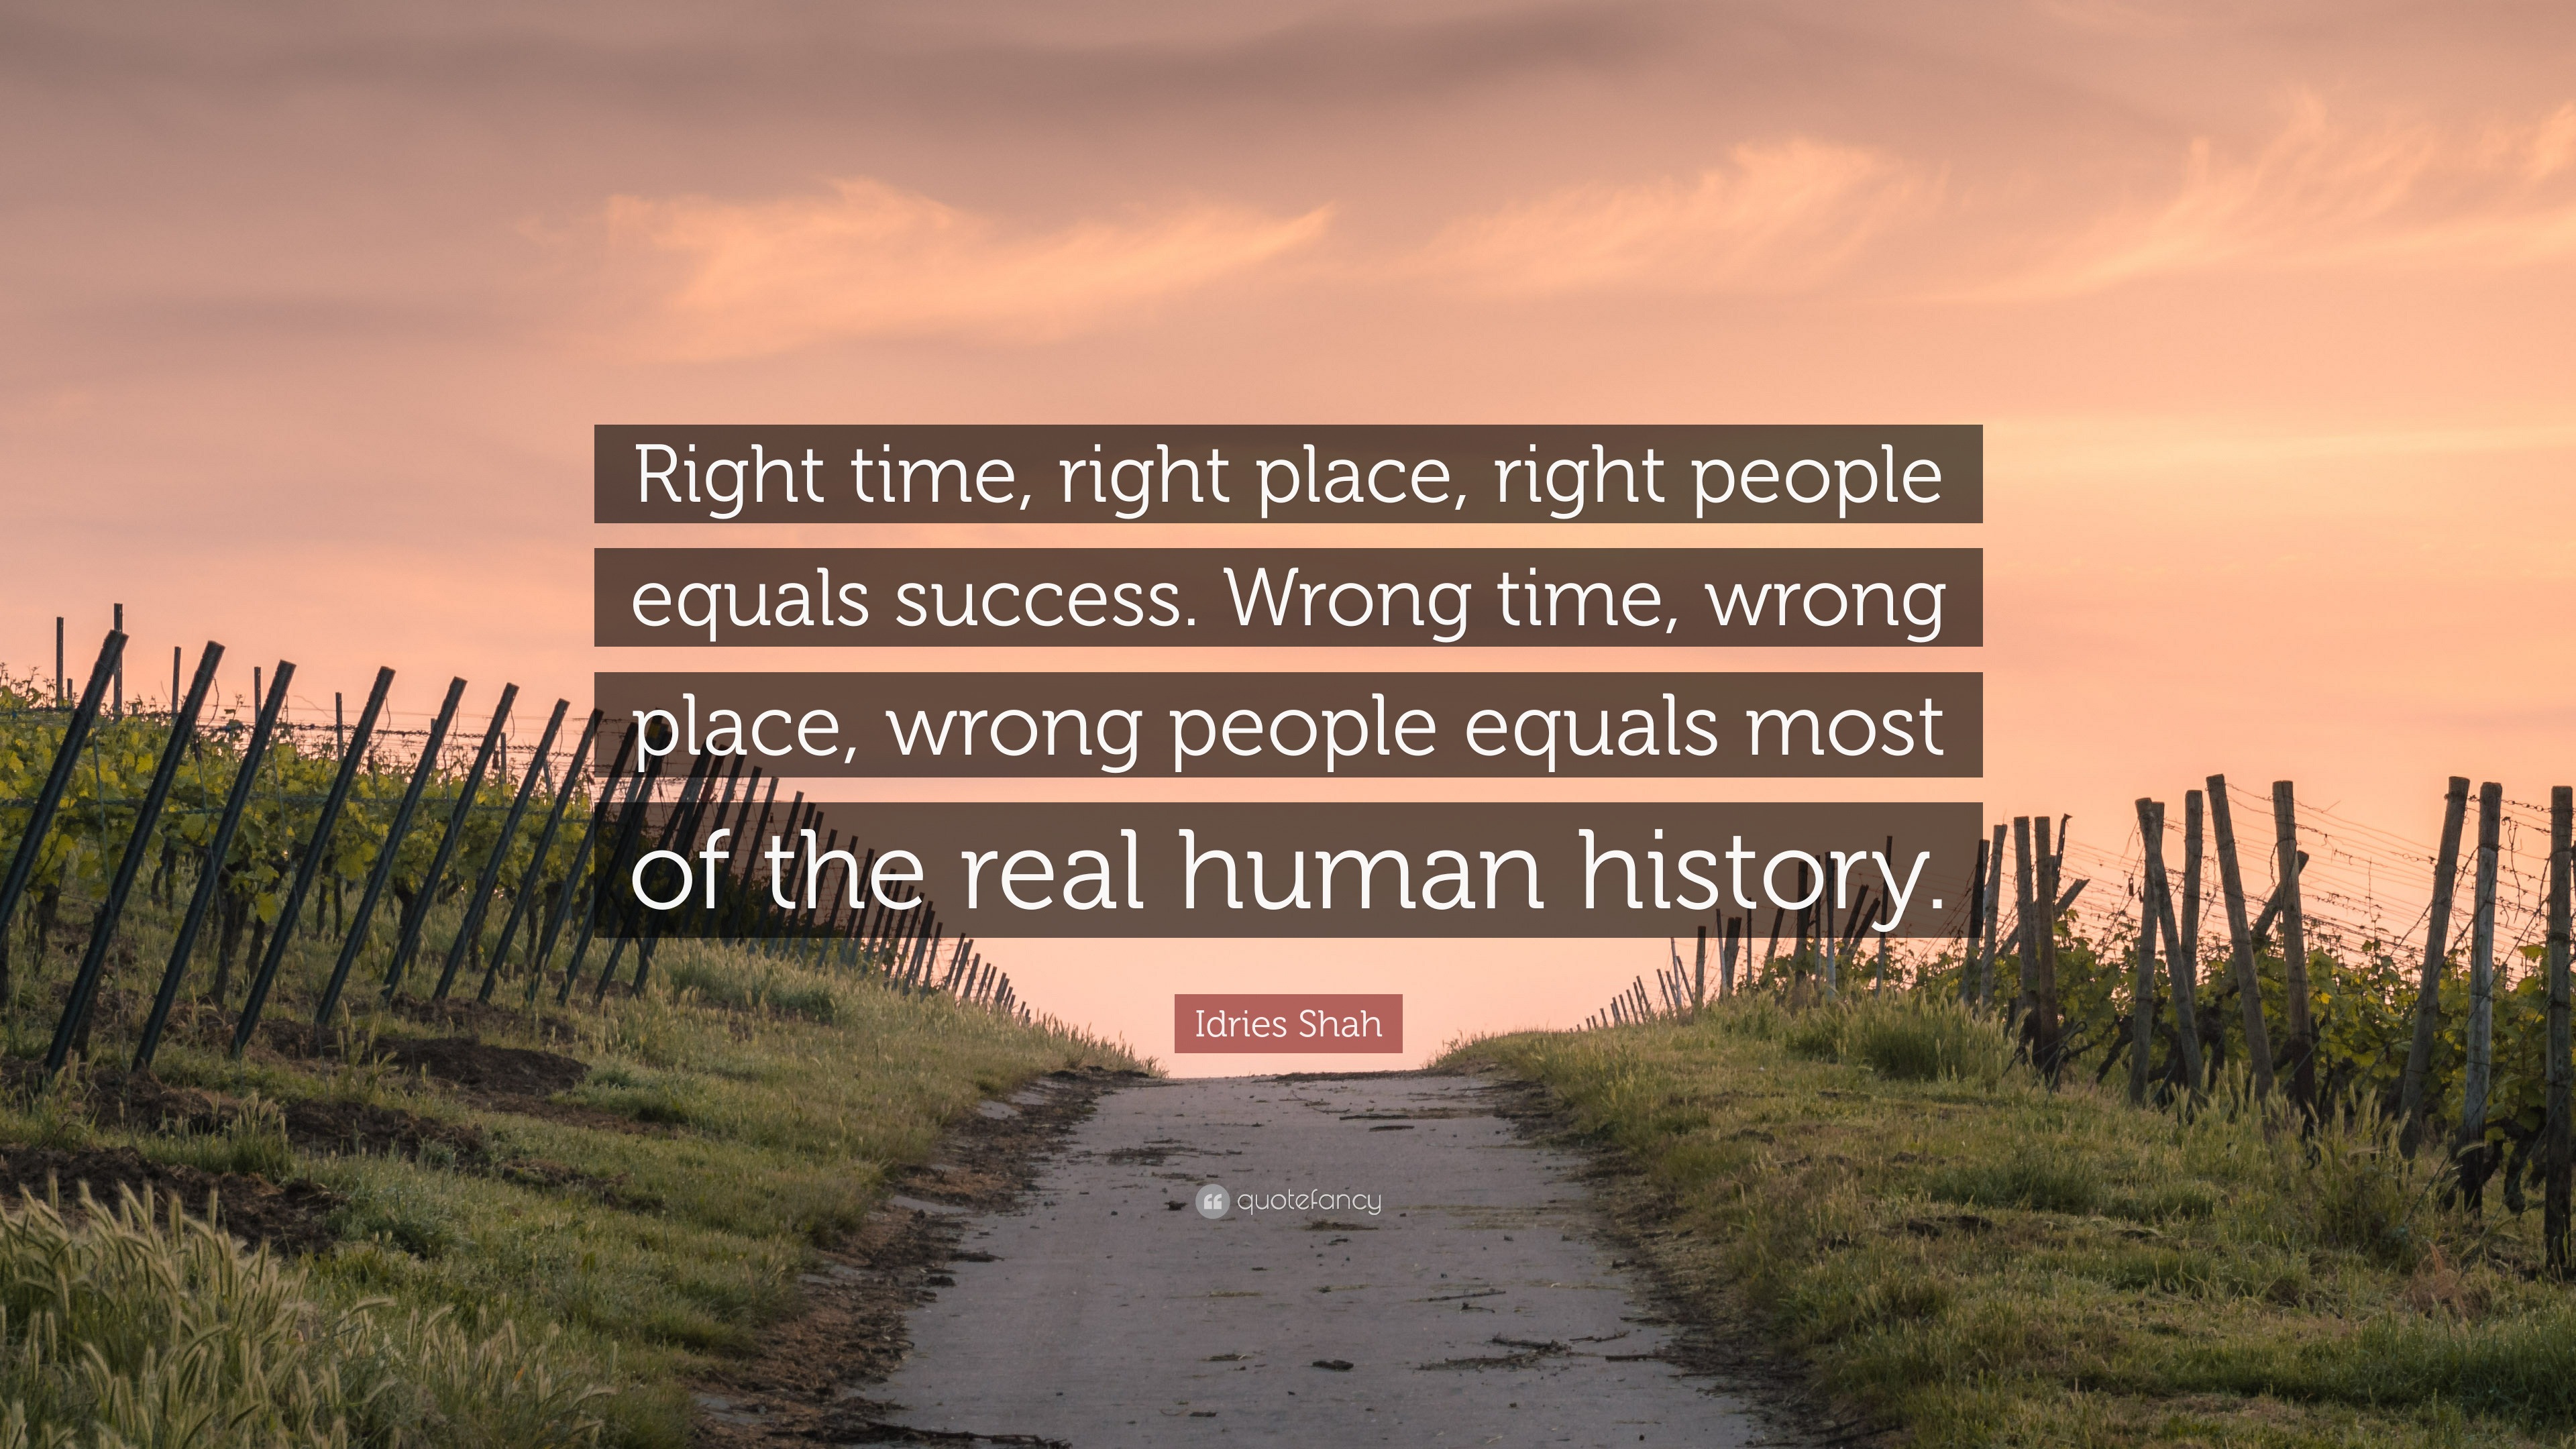 Idries Shah Quote “Right time right place right people equals success